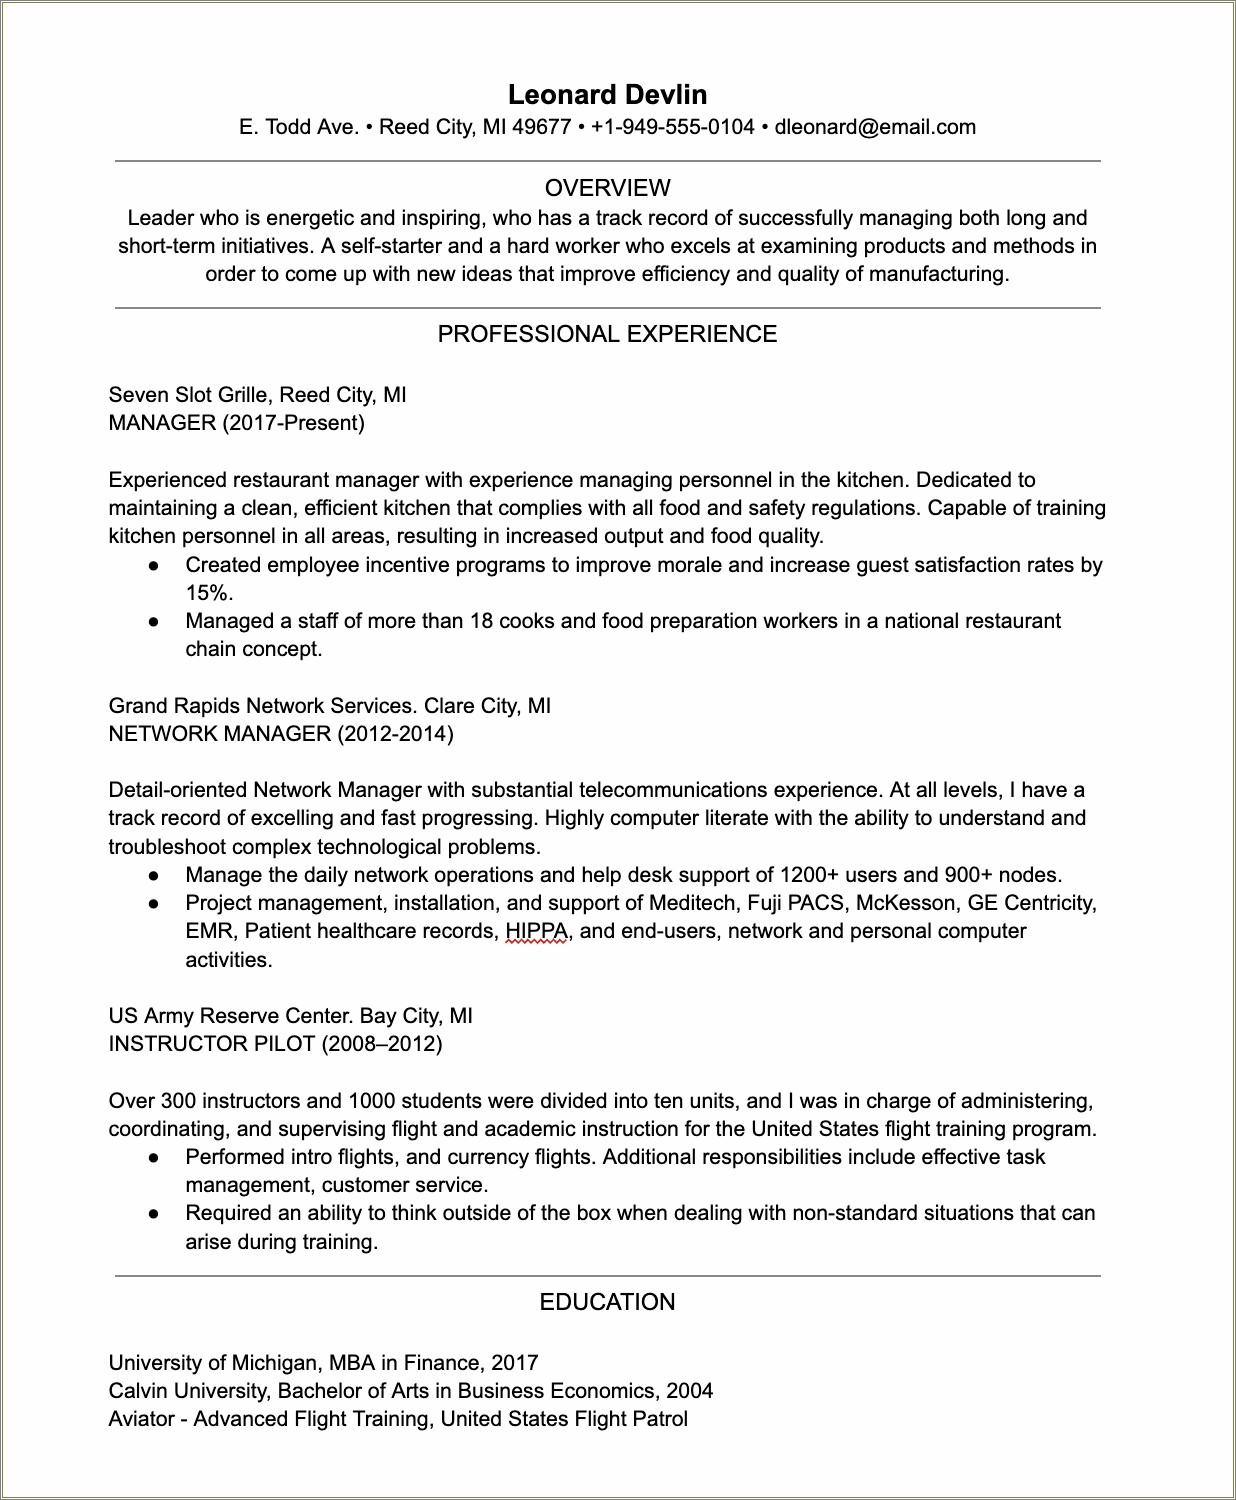 Mba Application Resume Recently Started A New Job